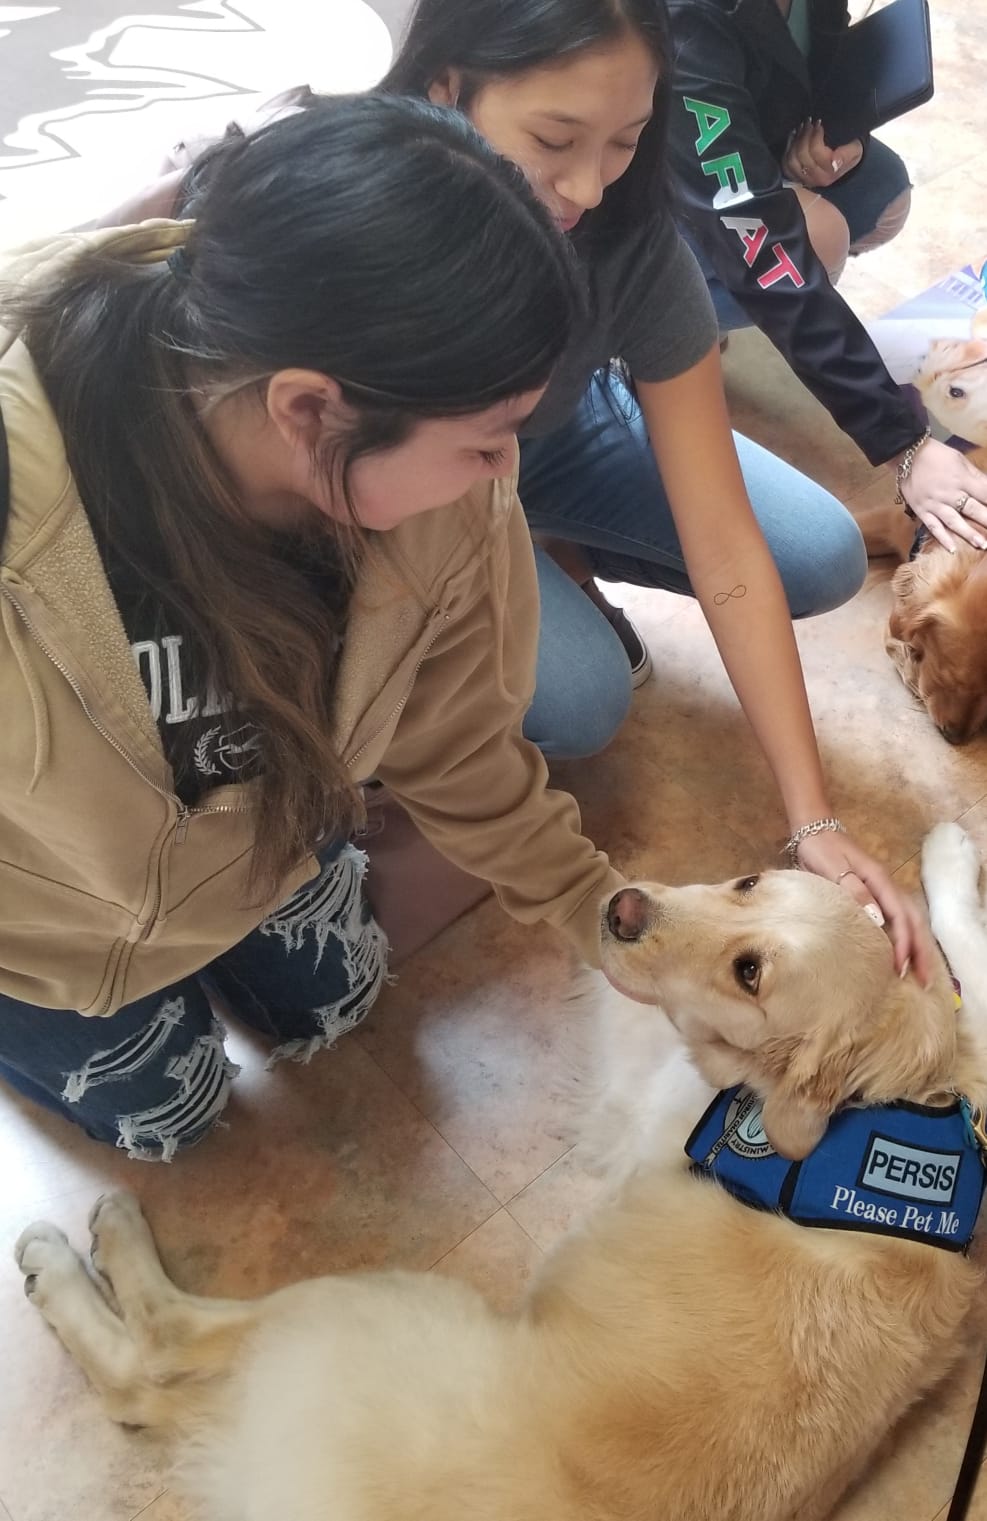 two students petting the same golden retriever who is laying on the ground and looking up at them lovingly.